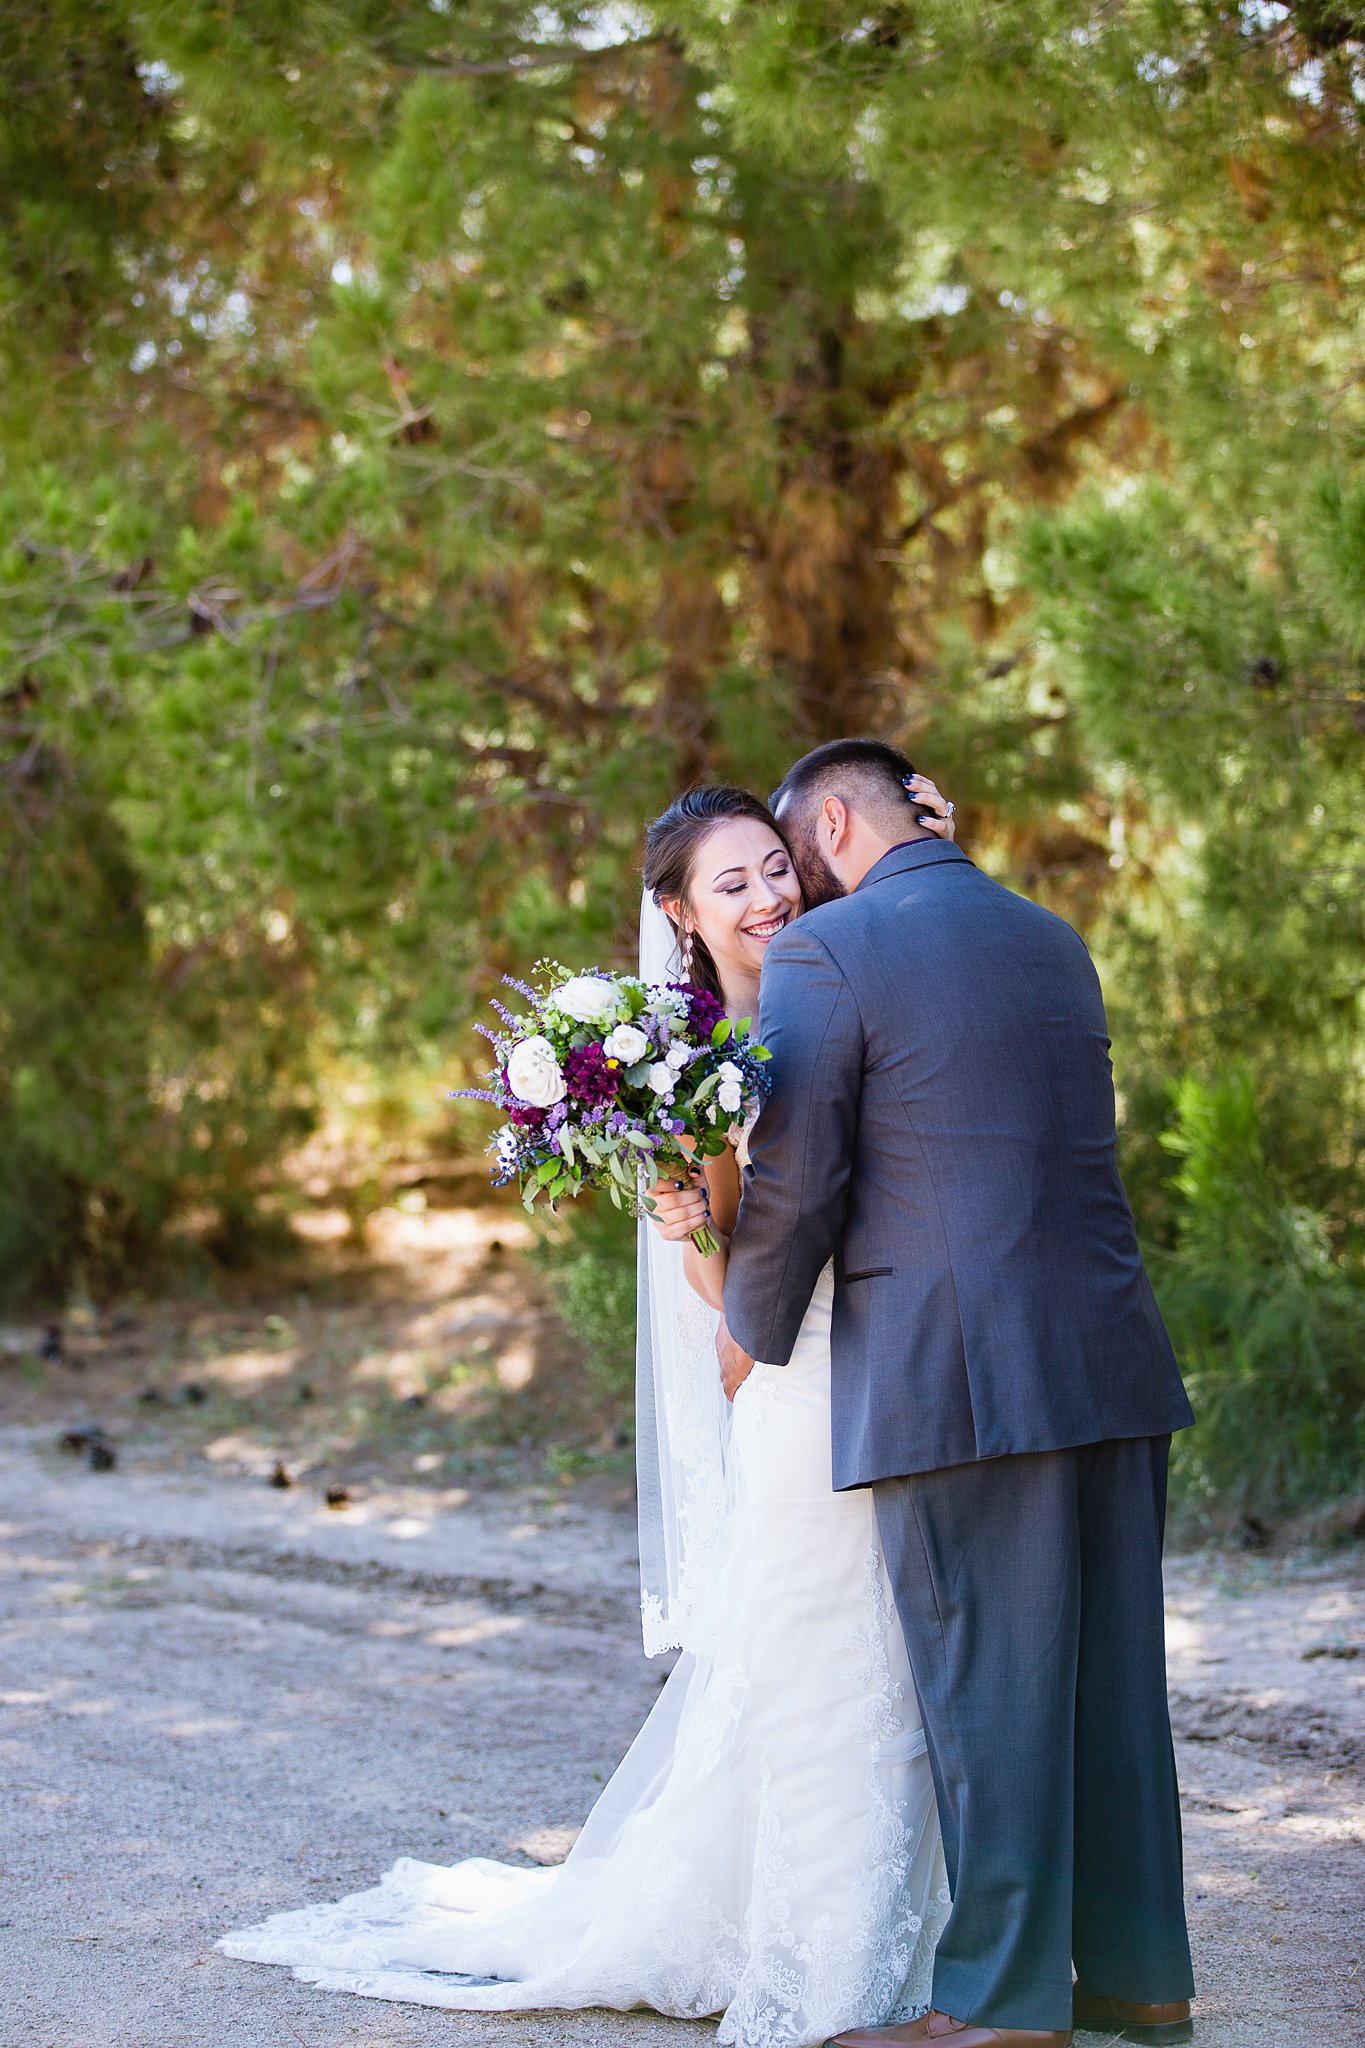 Bride and groom share an intimate moment during their first look during their Schnepf Farms wedding by Arizona wedding photographer PMA Photography.